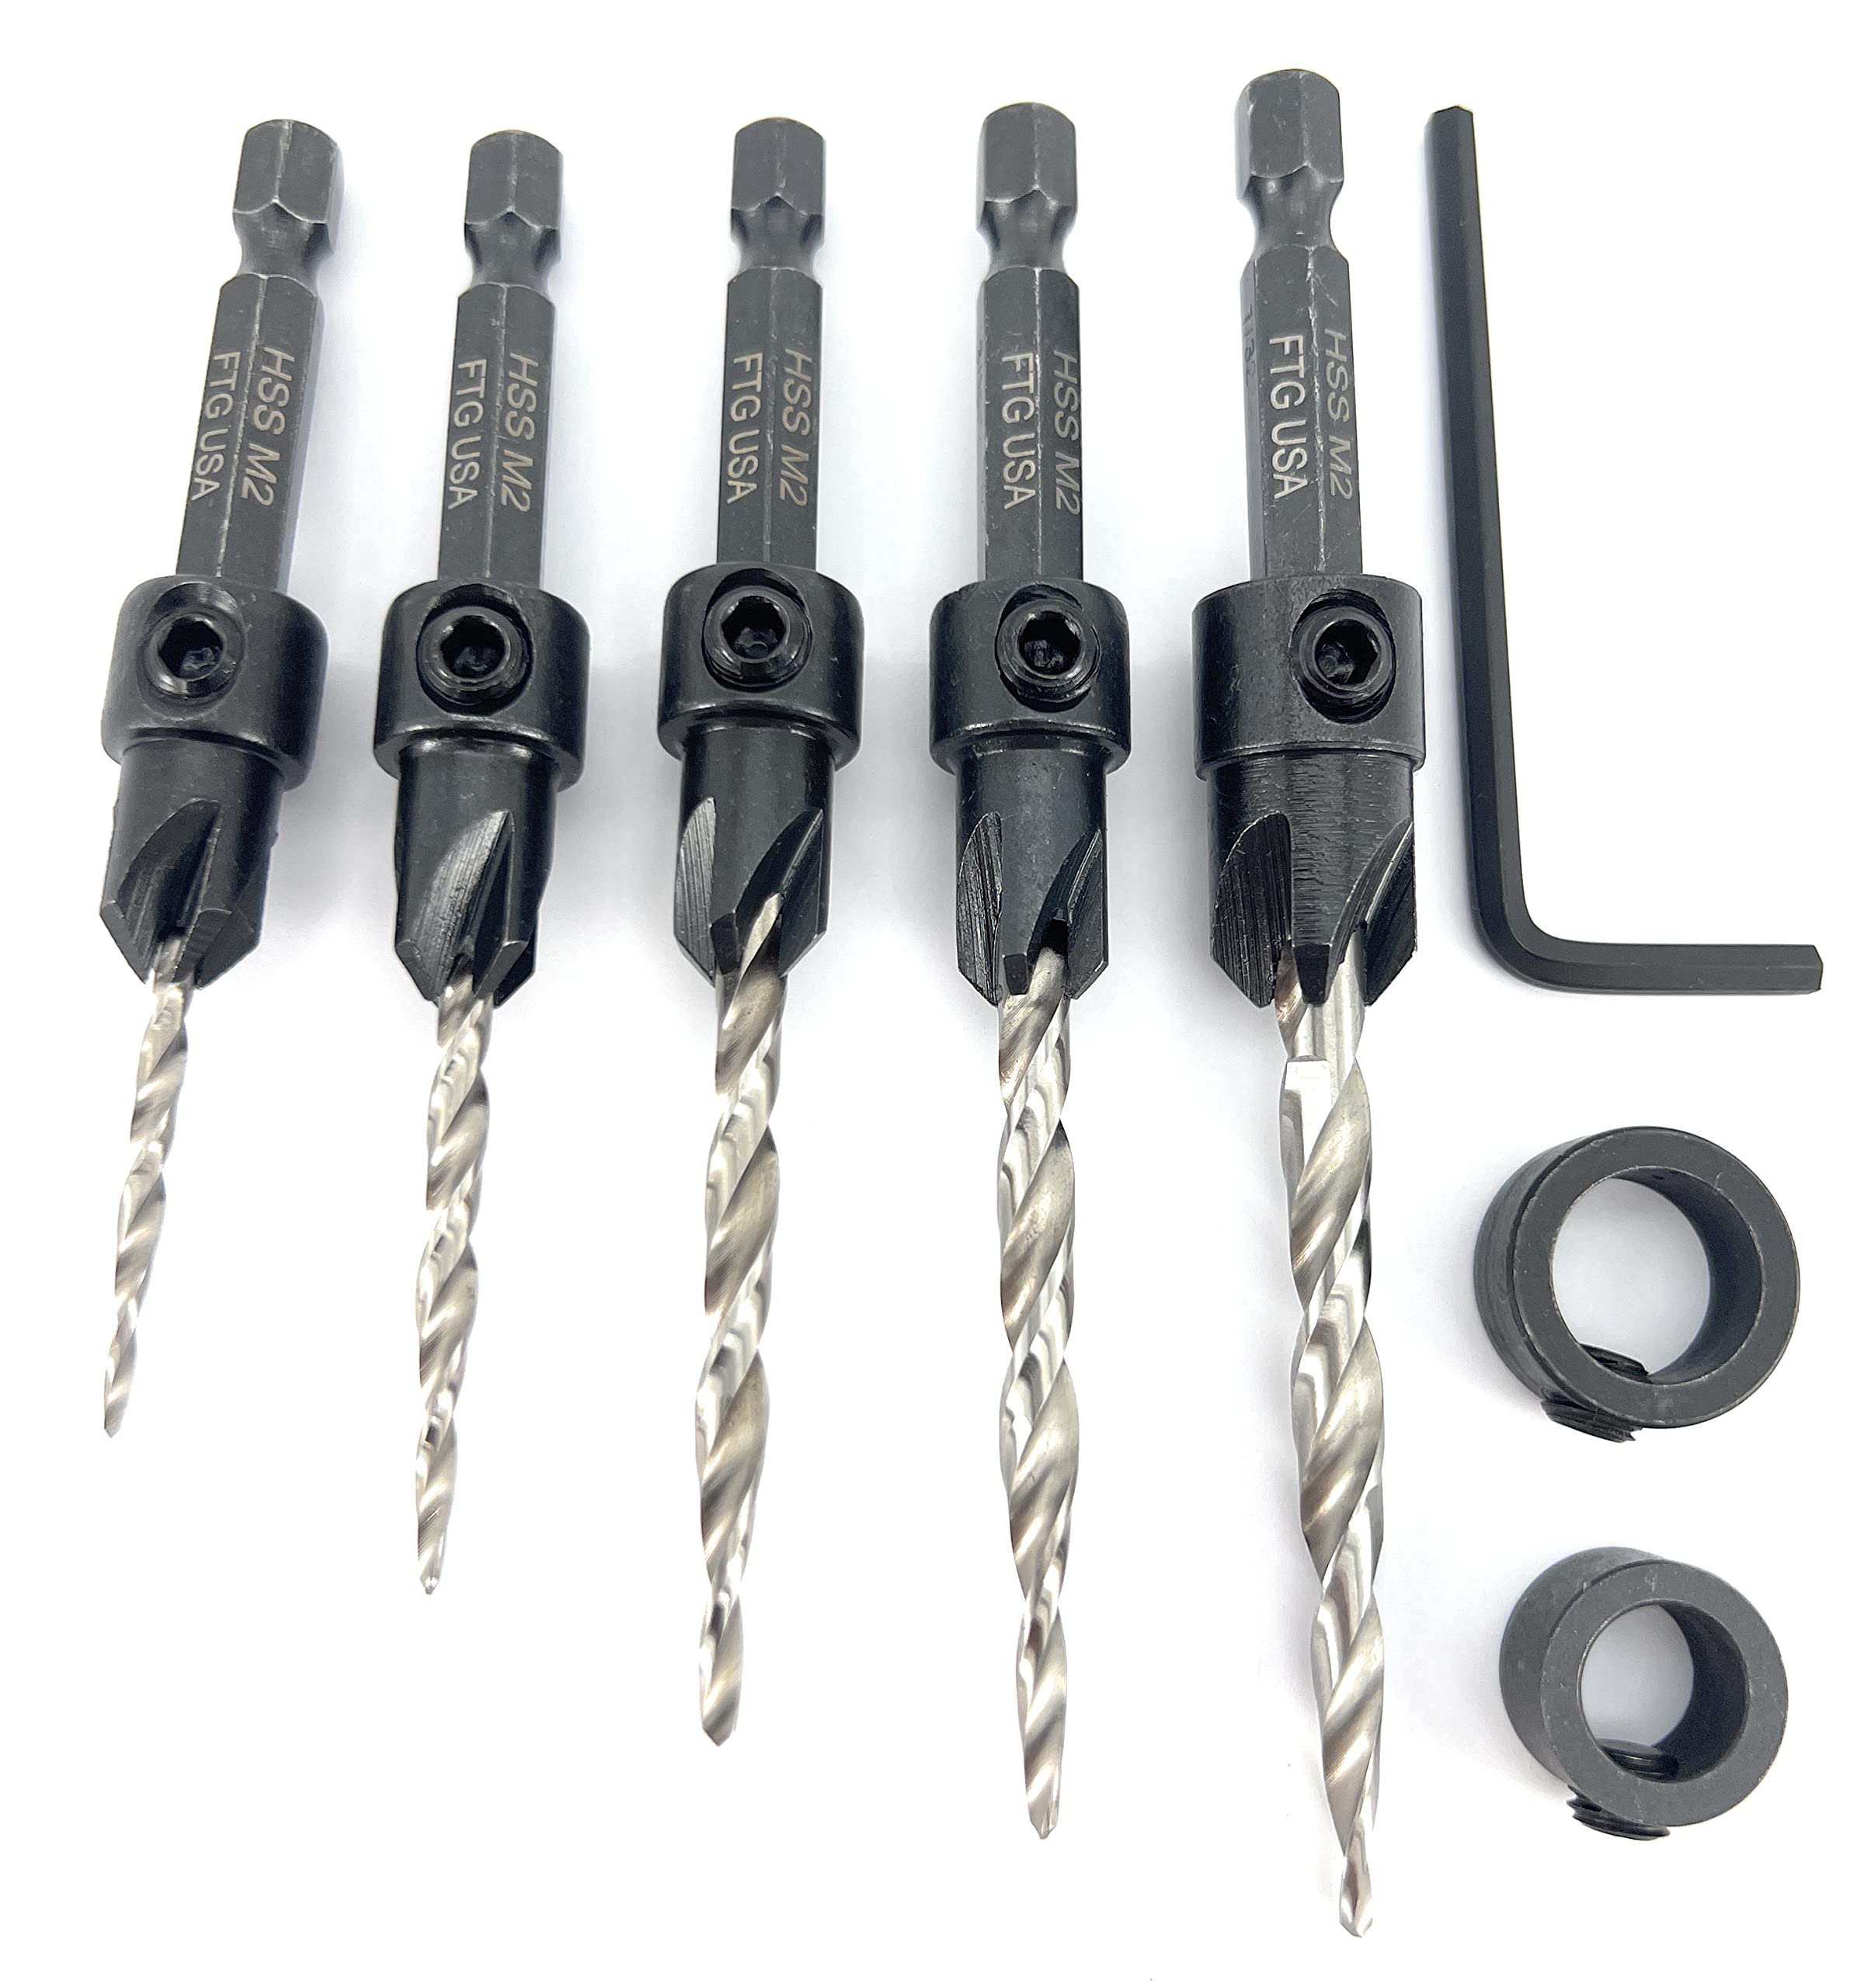 FTG USA Wood Countersink Drill Bit Set 5 Sizes Set Countersink #4, 6, 8, 10, 12 Tapered Drill Bits with Hex Shank Countersink bit, 2 Stop Collar, 1 Allen Wrench, 6 Storage Containers